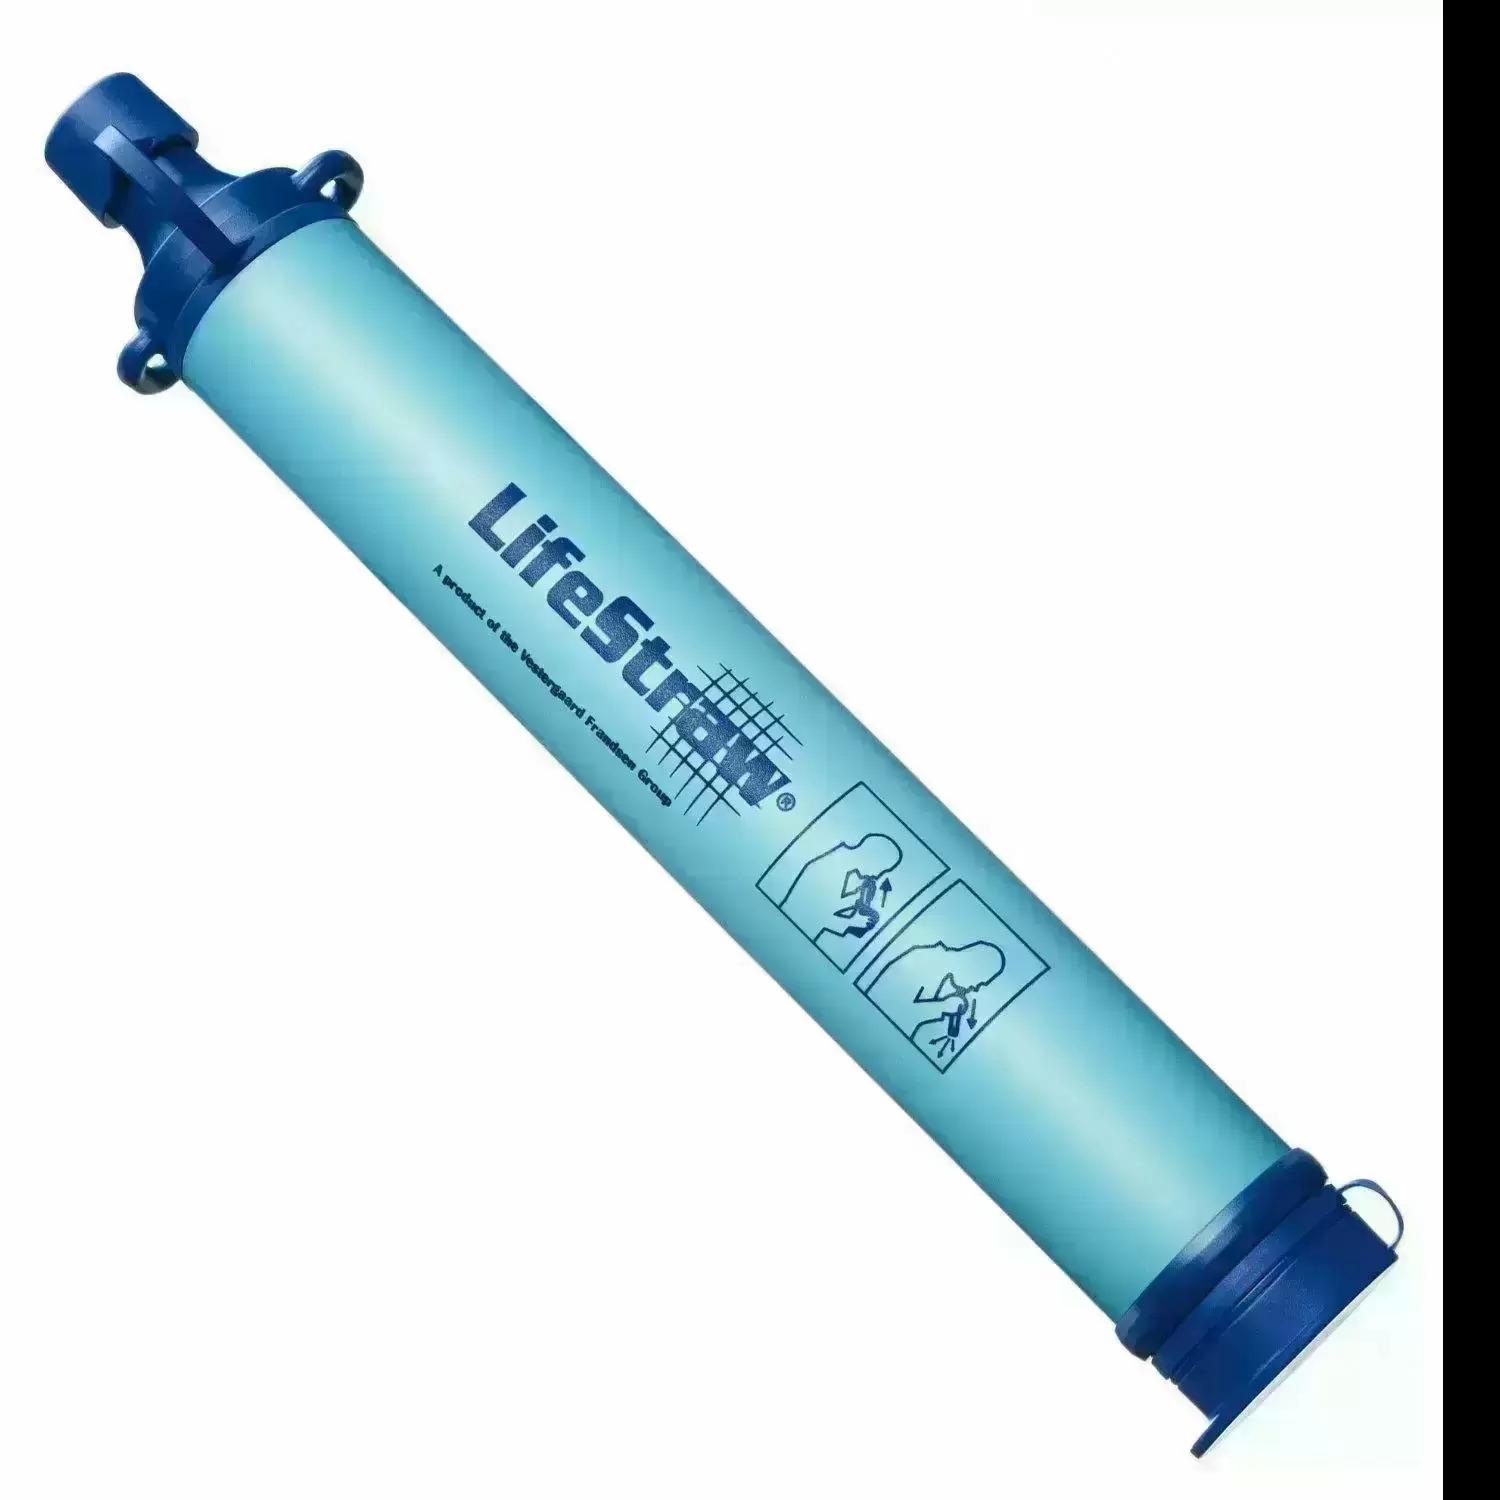 LifeStraw Personal Water Filter for $9.88